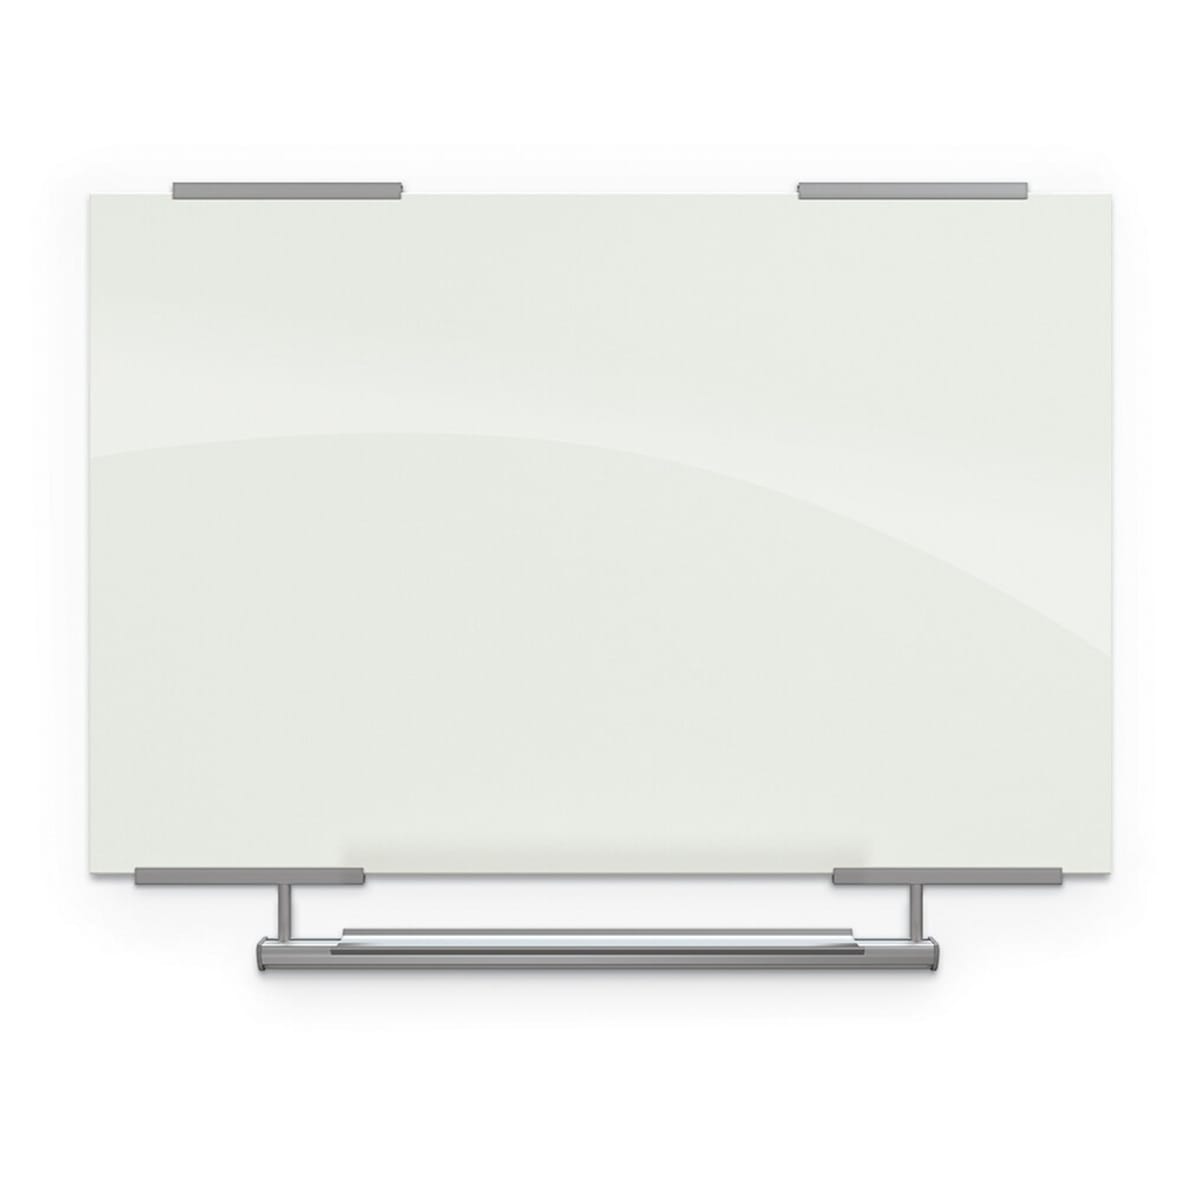 Mooreco 8'W X 4'H - Visionary Magnetic Glass Dry Erase Whiteboard with Exo Tray System - Glossy White (Mooreco 83846-2X576) - SchoolOutlet